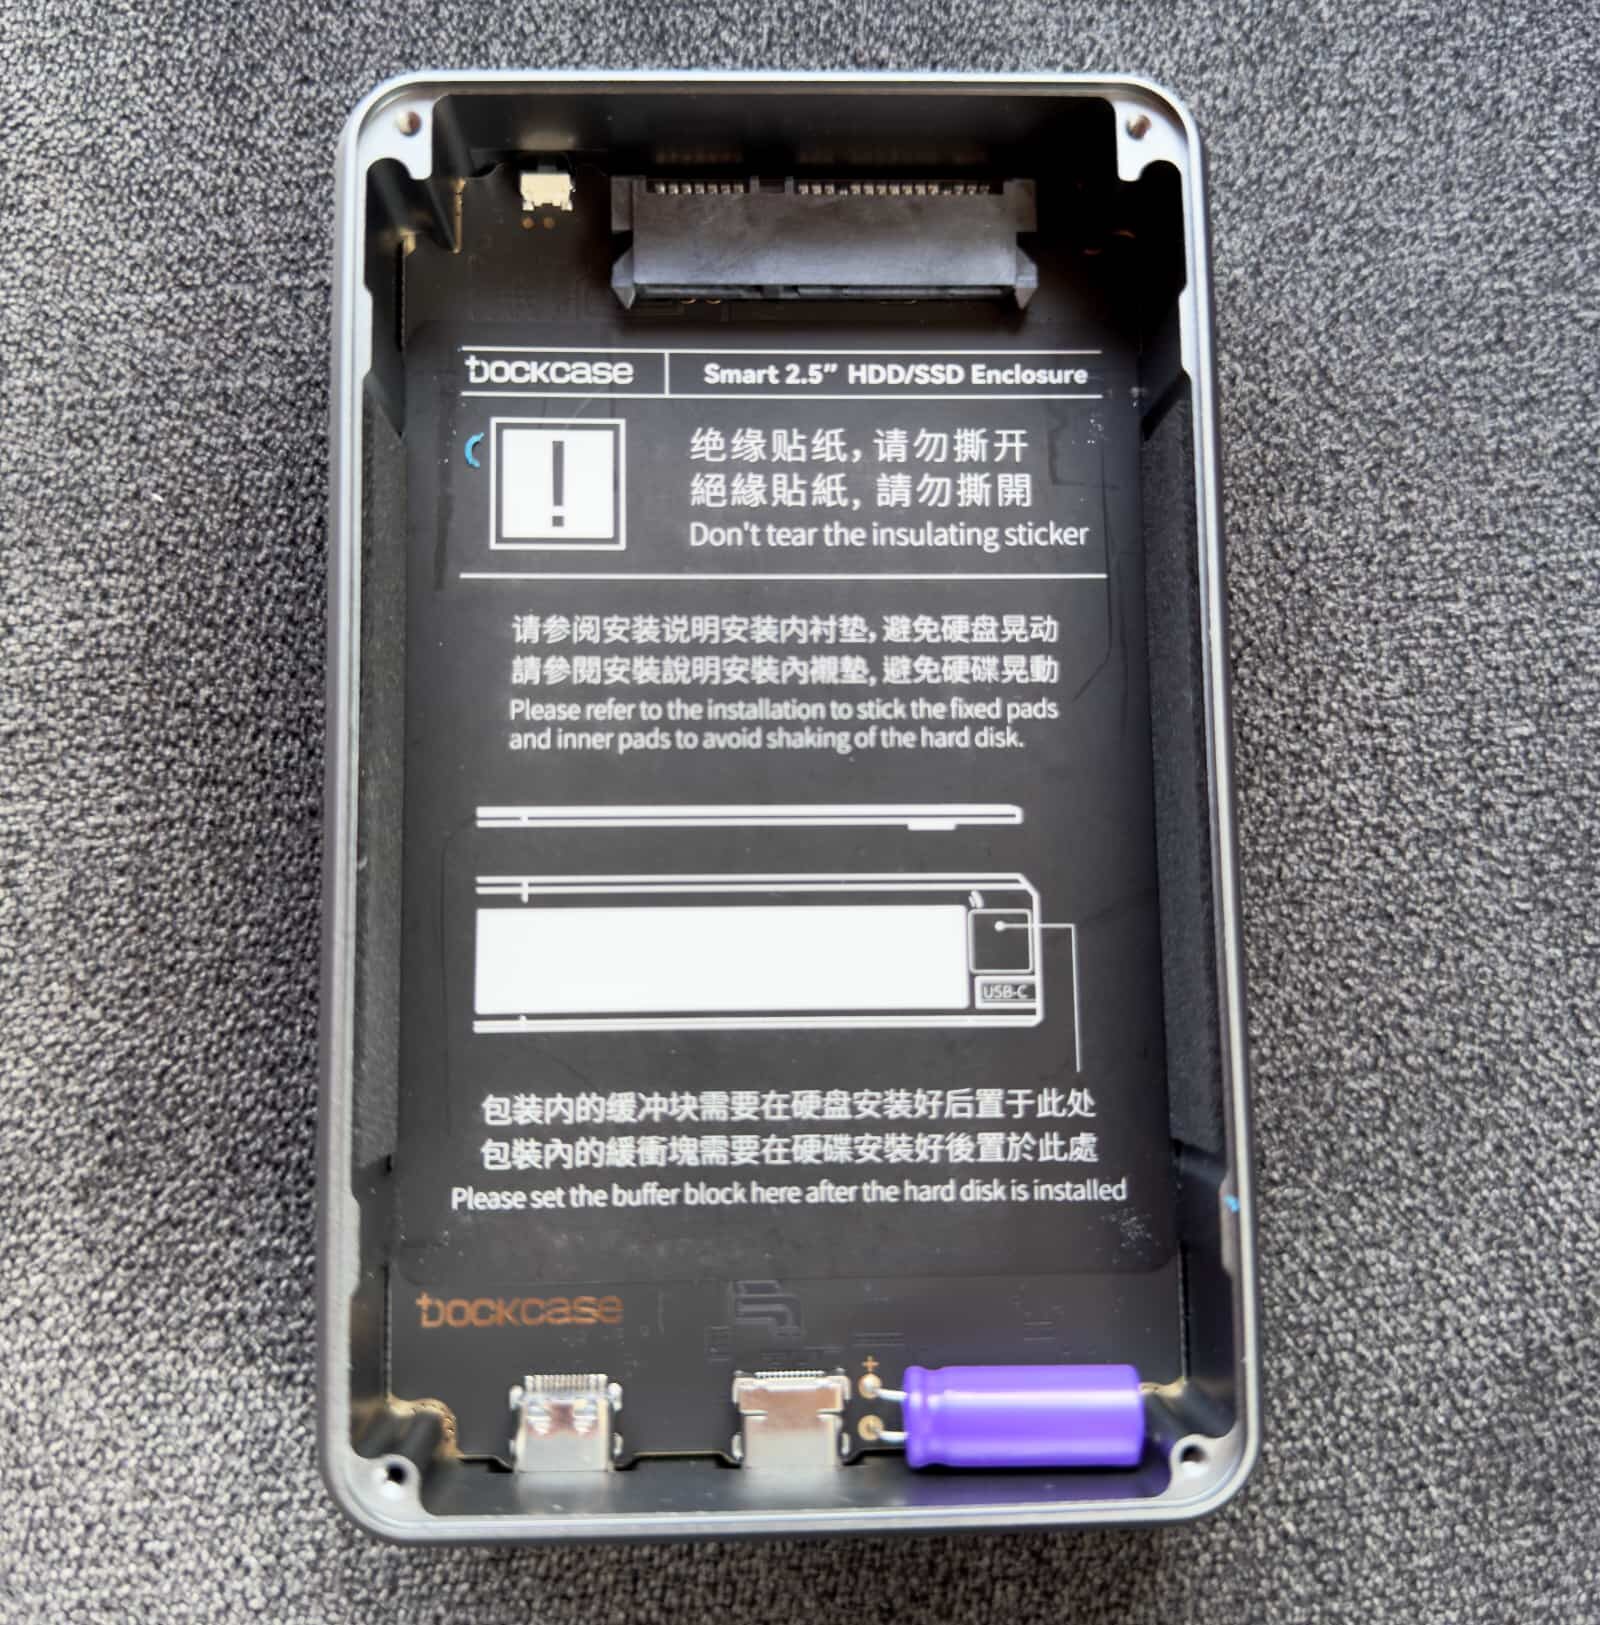 A top-down view of the DockCase external storage enclosure with the metal cover removed, exposing an insulating sticker, SATA III interface and capacitor on the inside